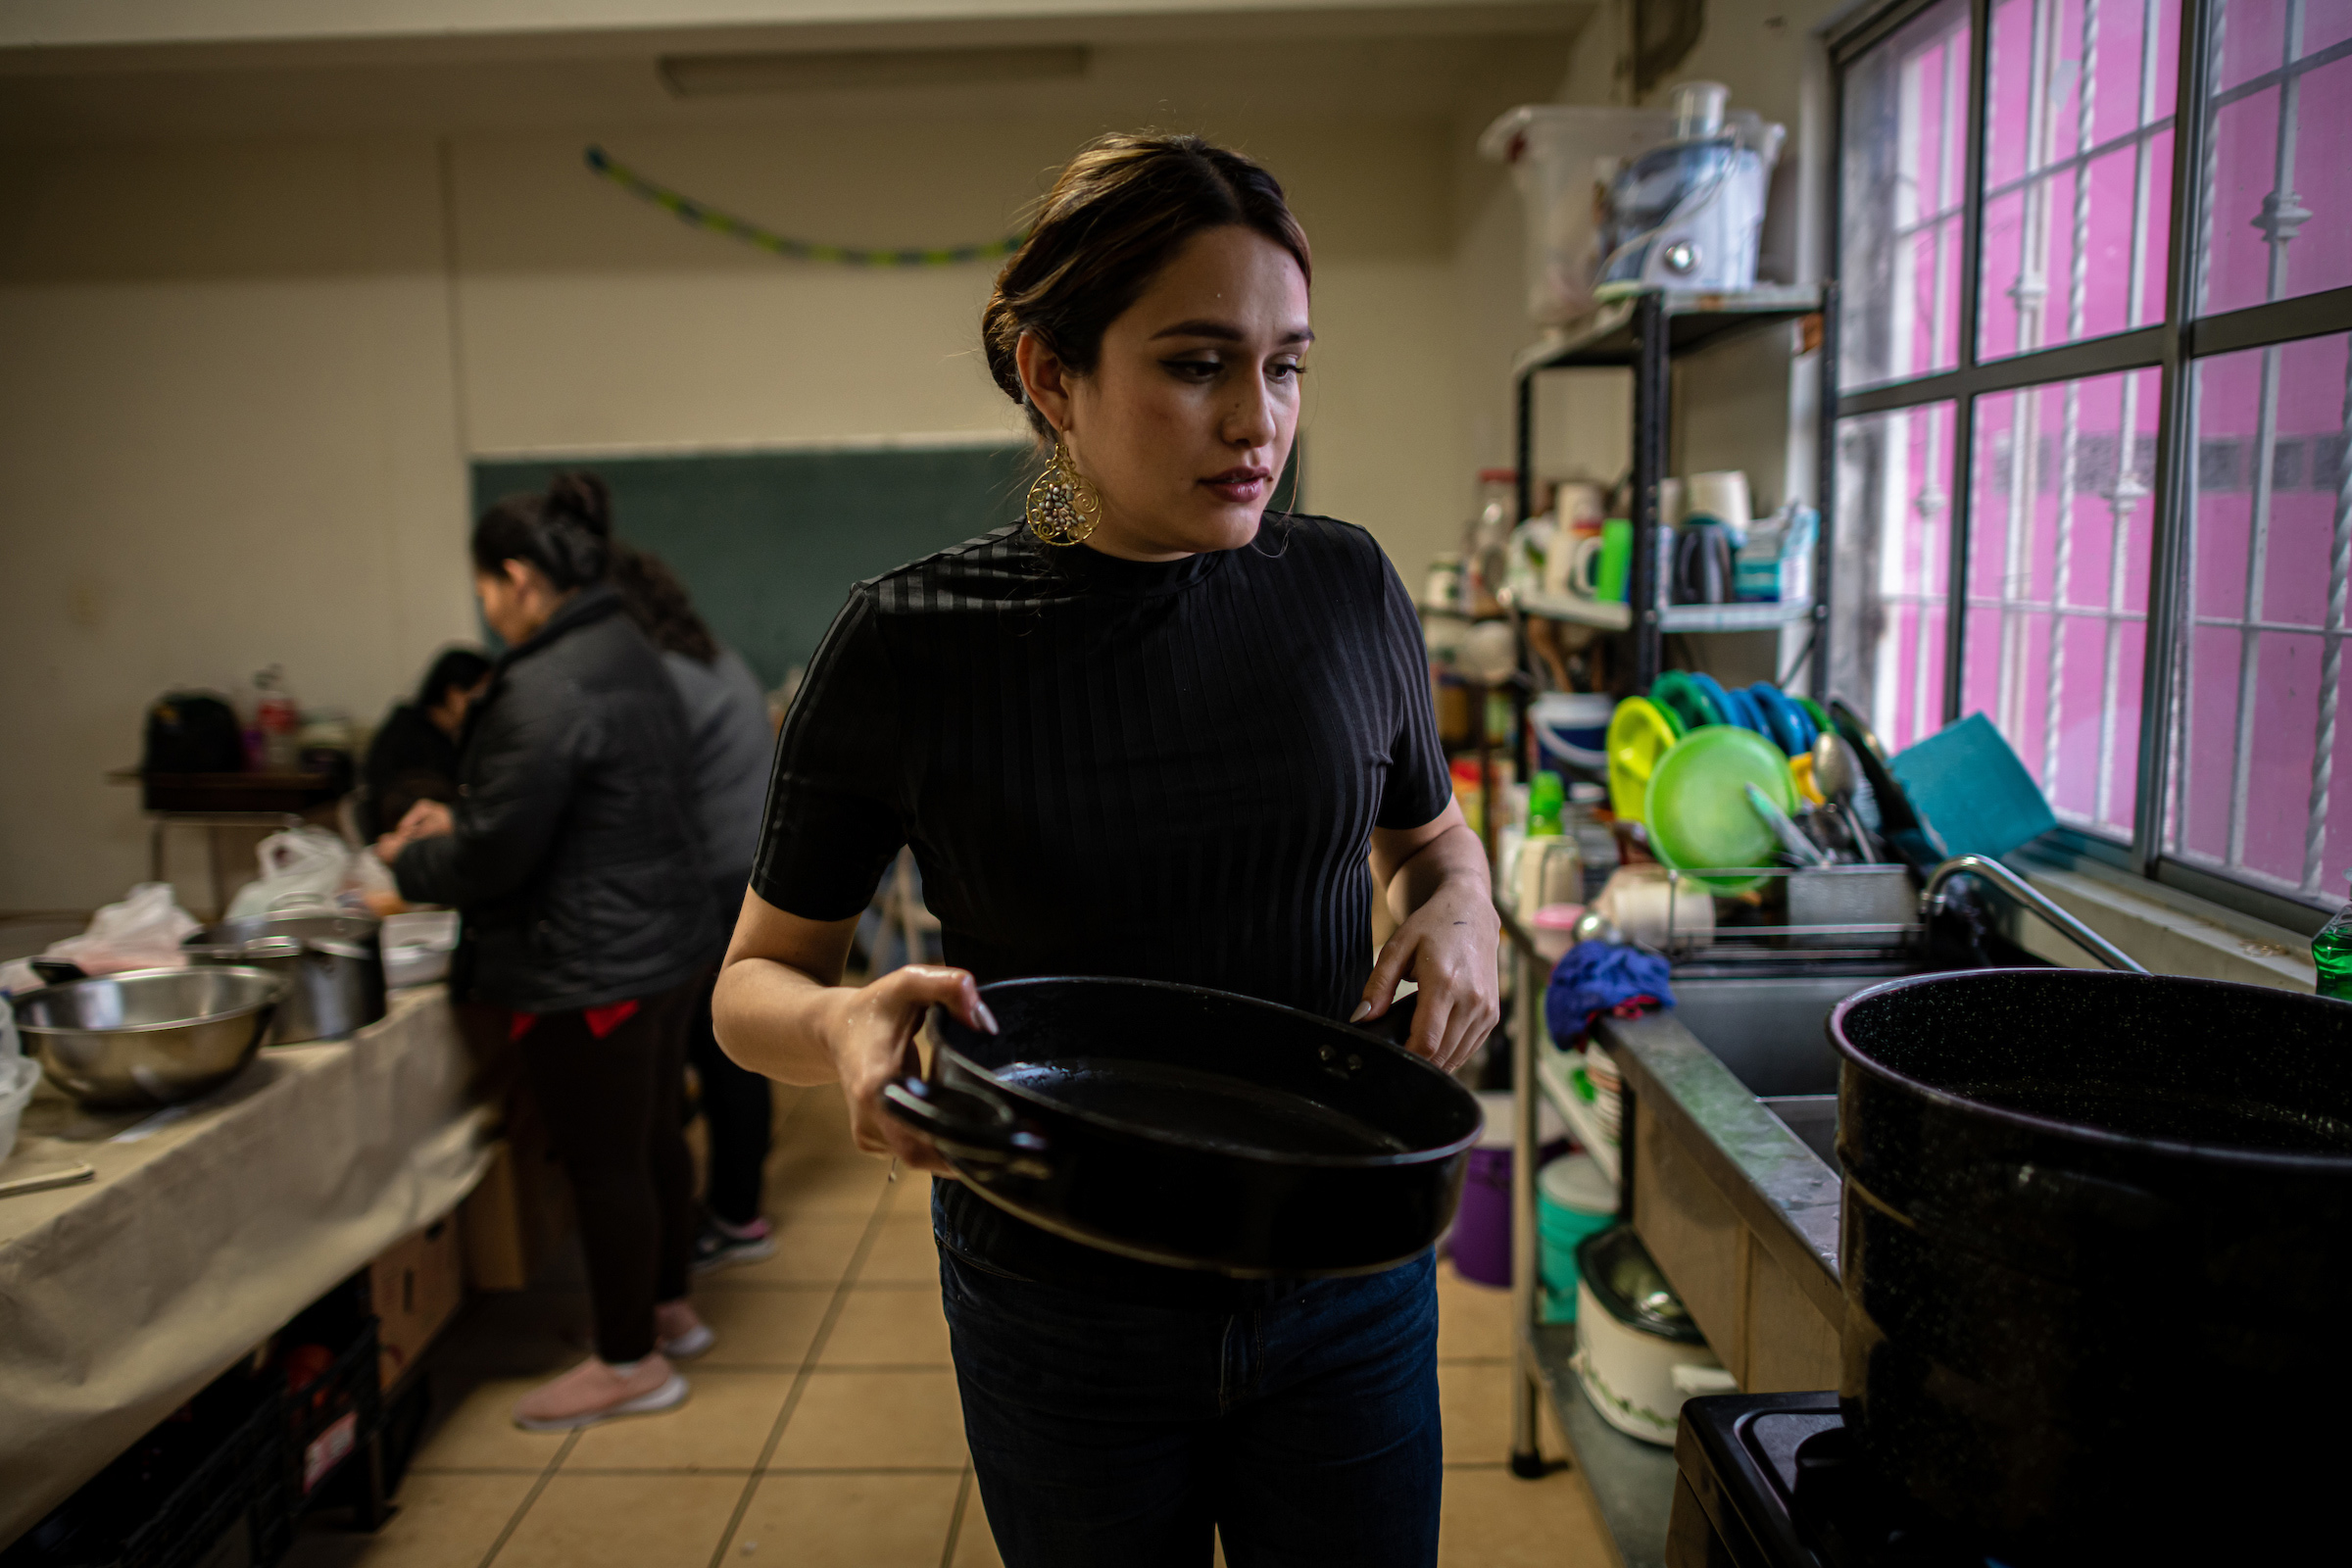 Shelter coordinator Karina Breceda cooks soup with migrant women in the kitchen. “When I see my team, they’re basically on call 24/7,” Breceda says. “There’s a lot of peace, and a lot of healing with the work that they’re doing."